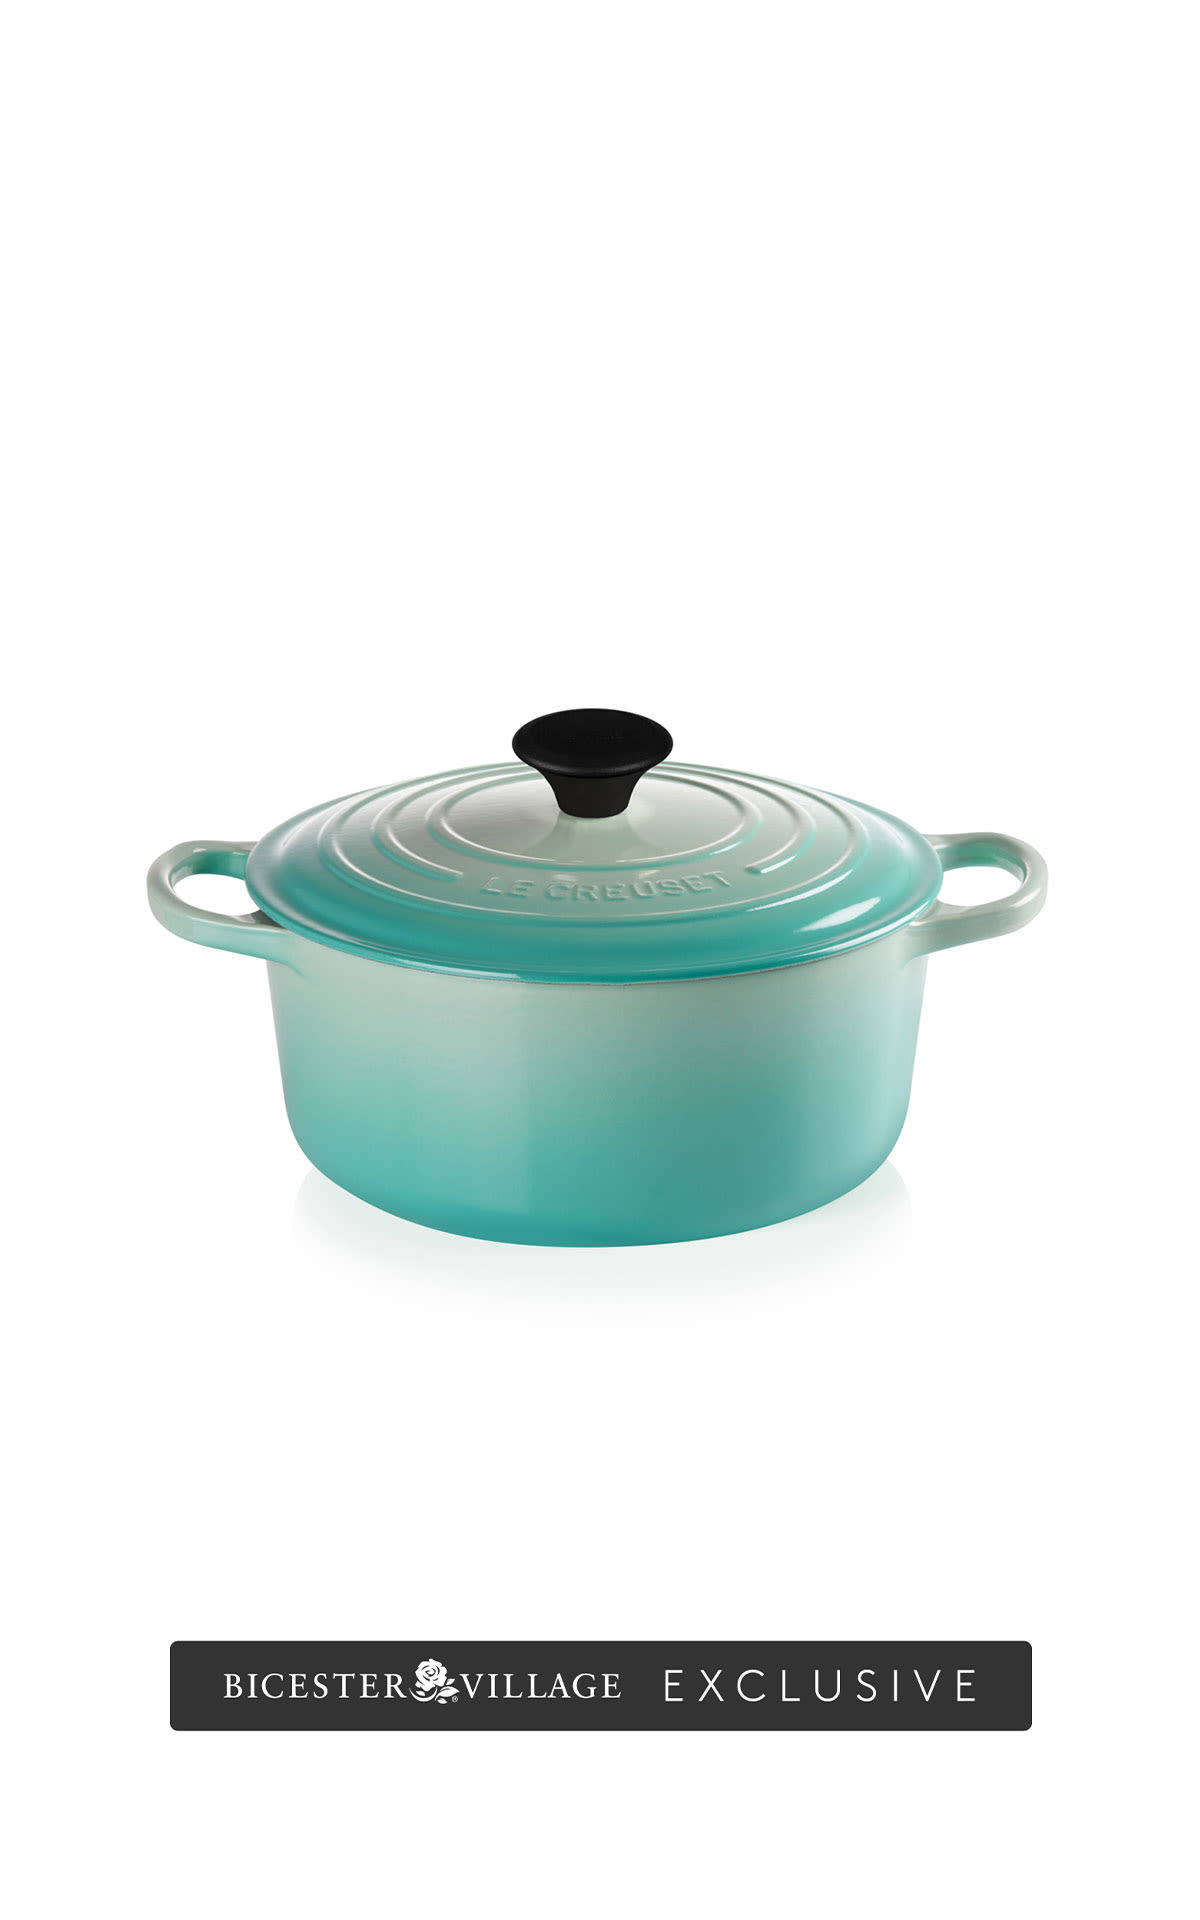 Le Creuset 24cm Cast iron round casserole cool mint from Bicester Village